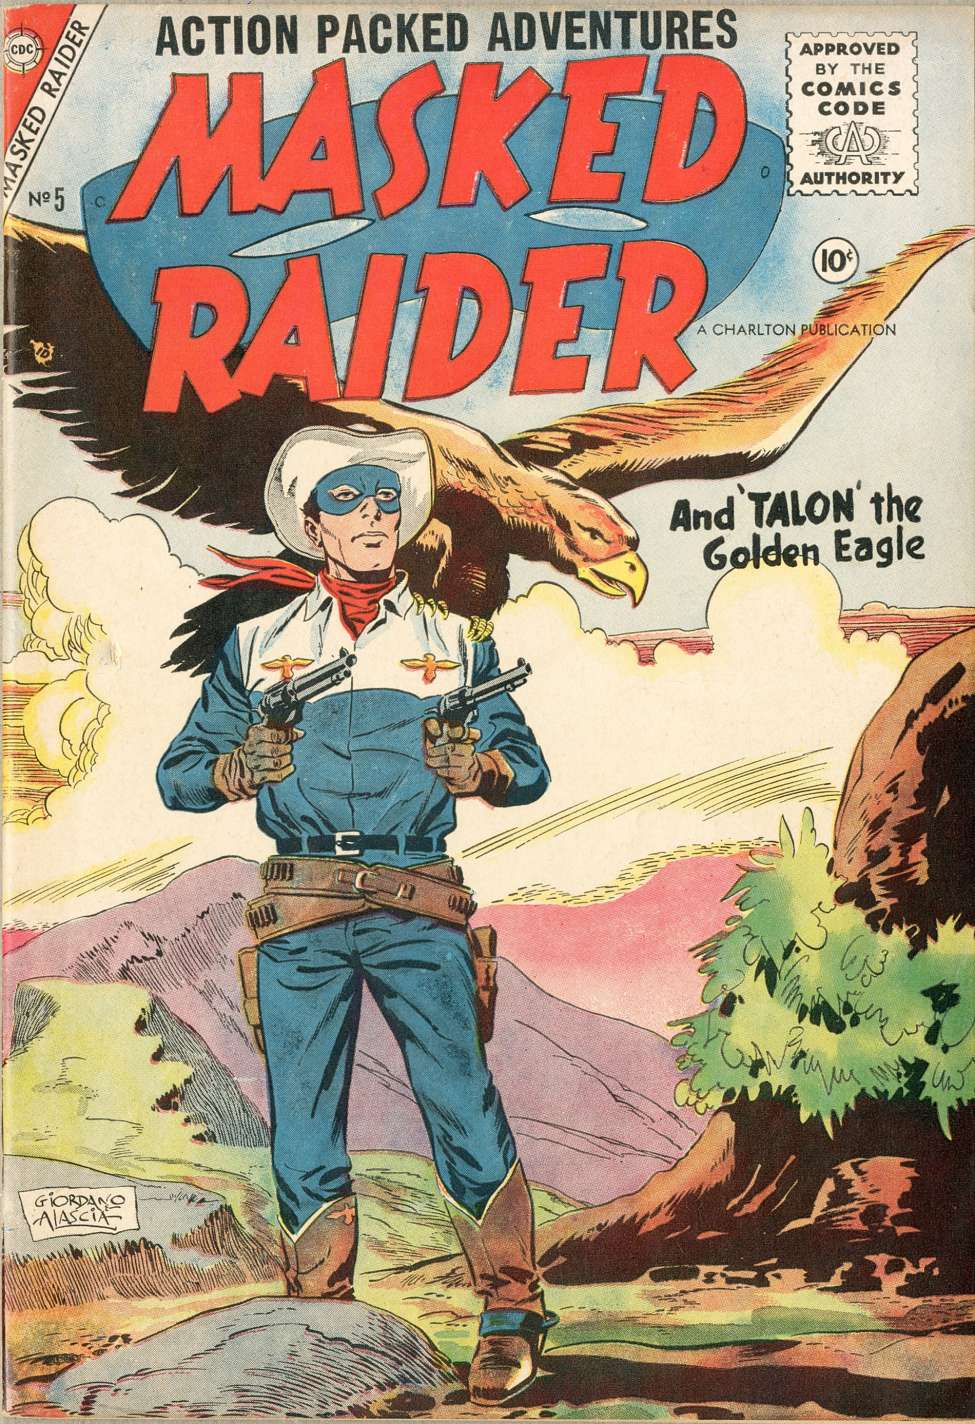 Book Cover For Masked Raider 5 - Version 1